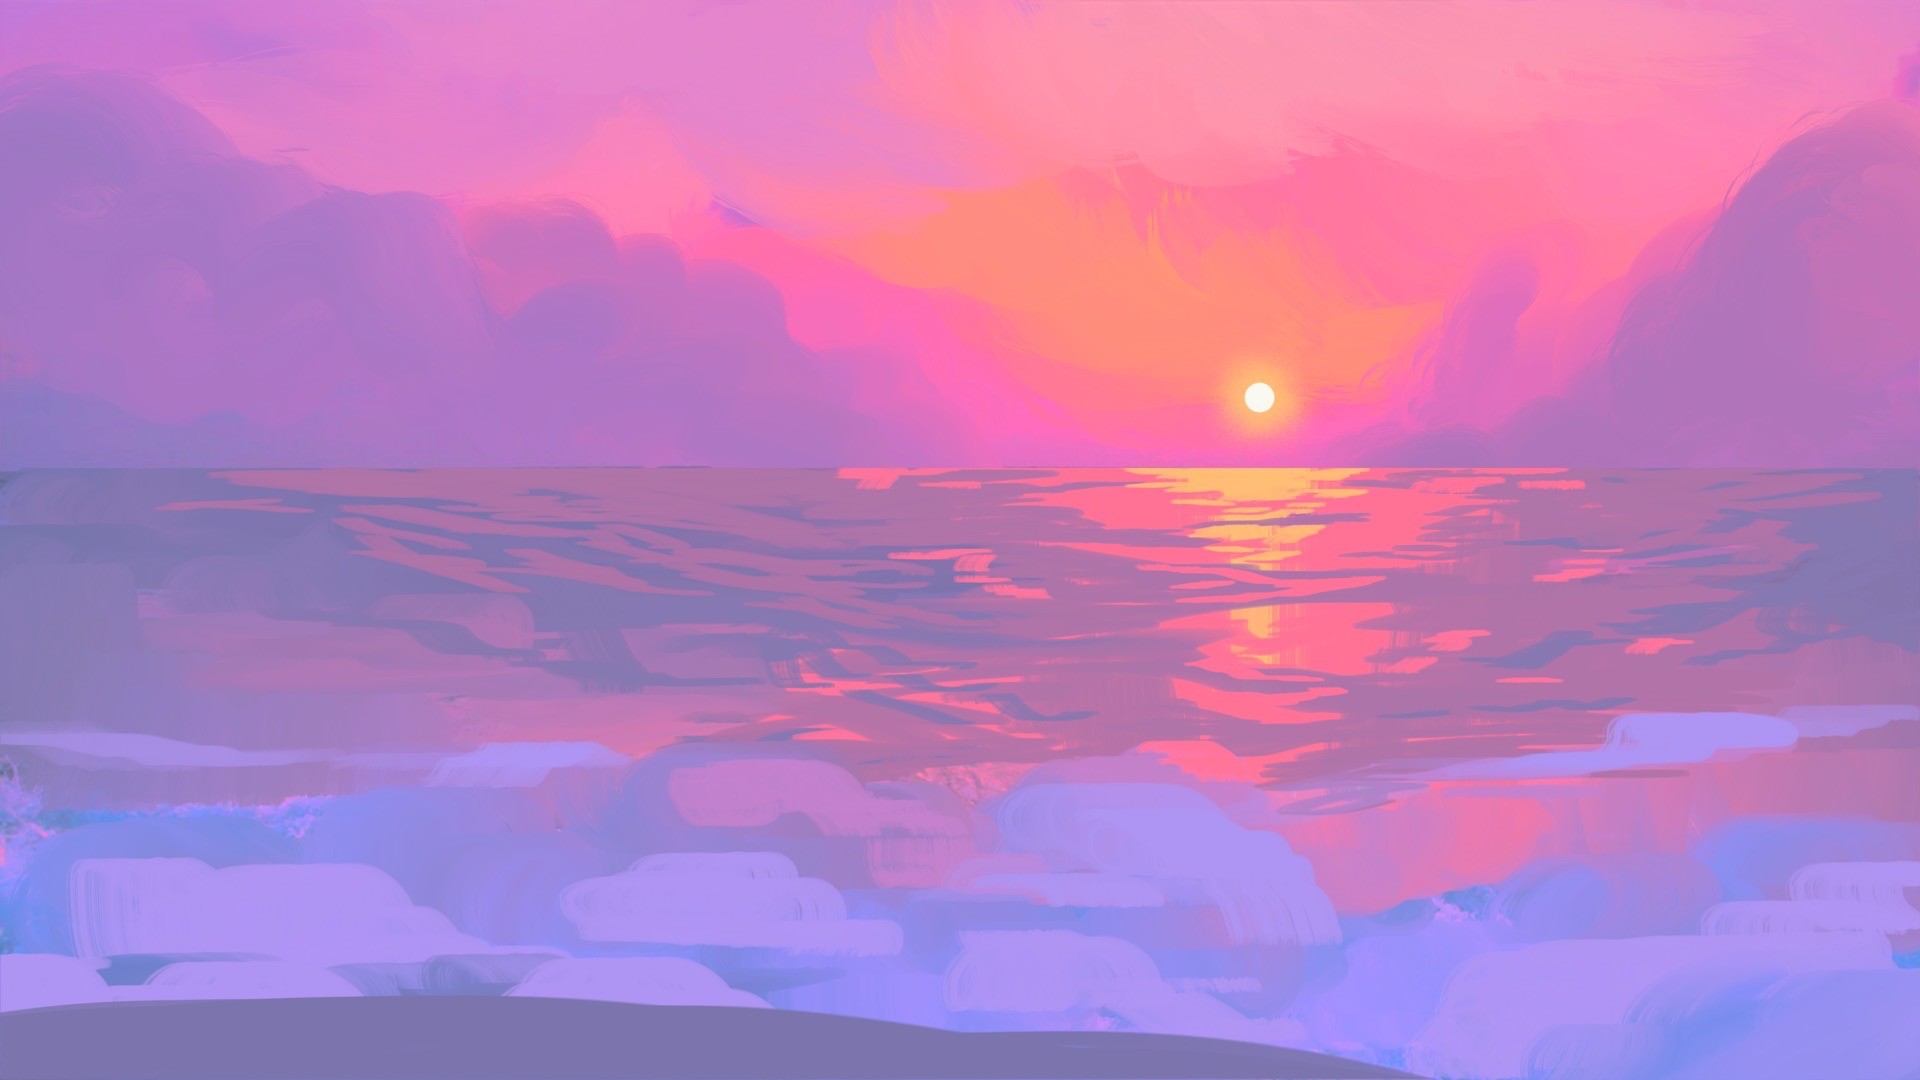 A digital art of a bright yellow sun in the pink clouds under the orange sky, above the relaxed beach